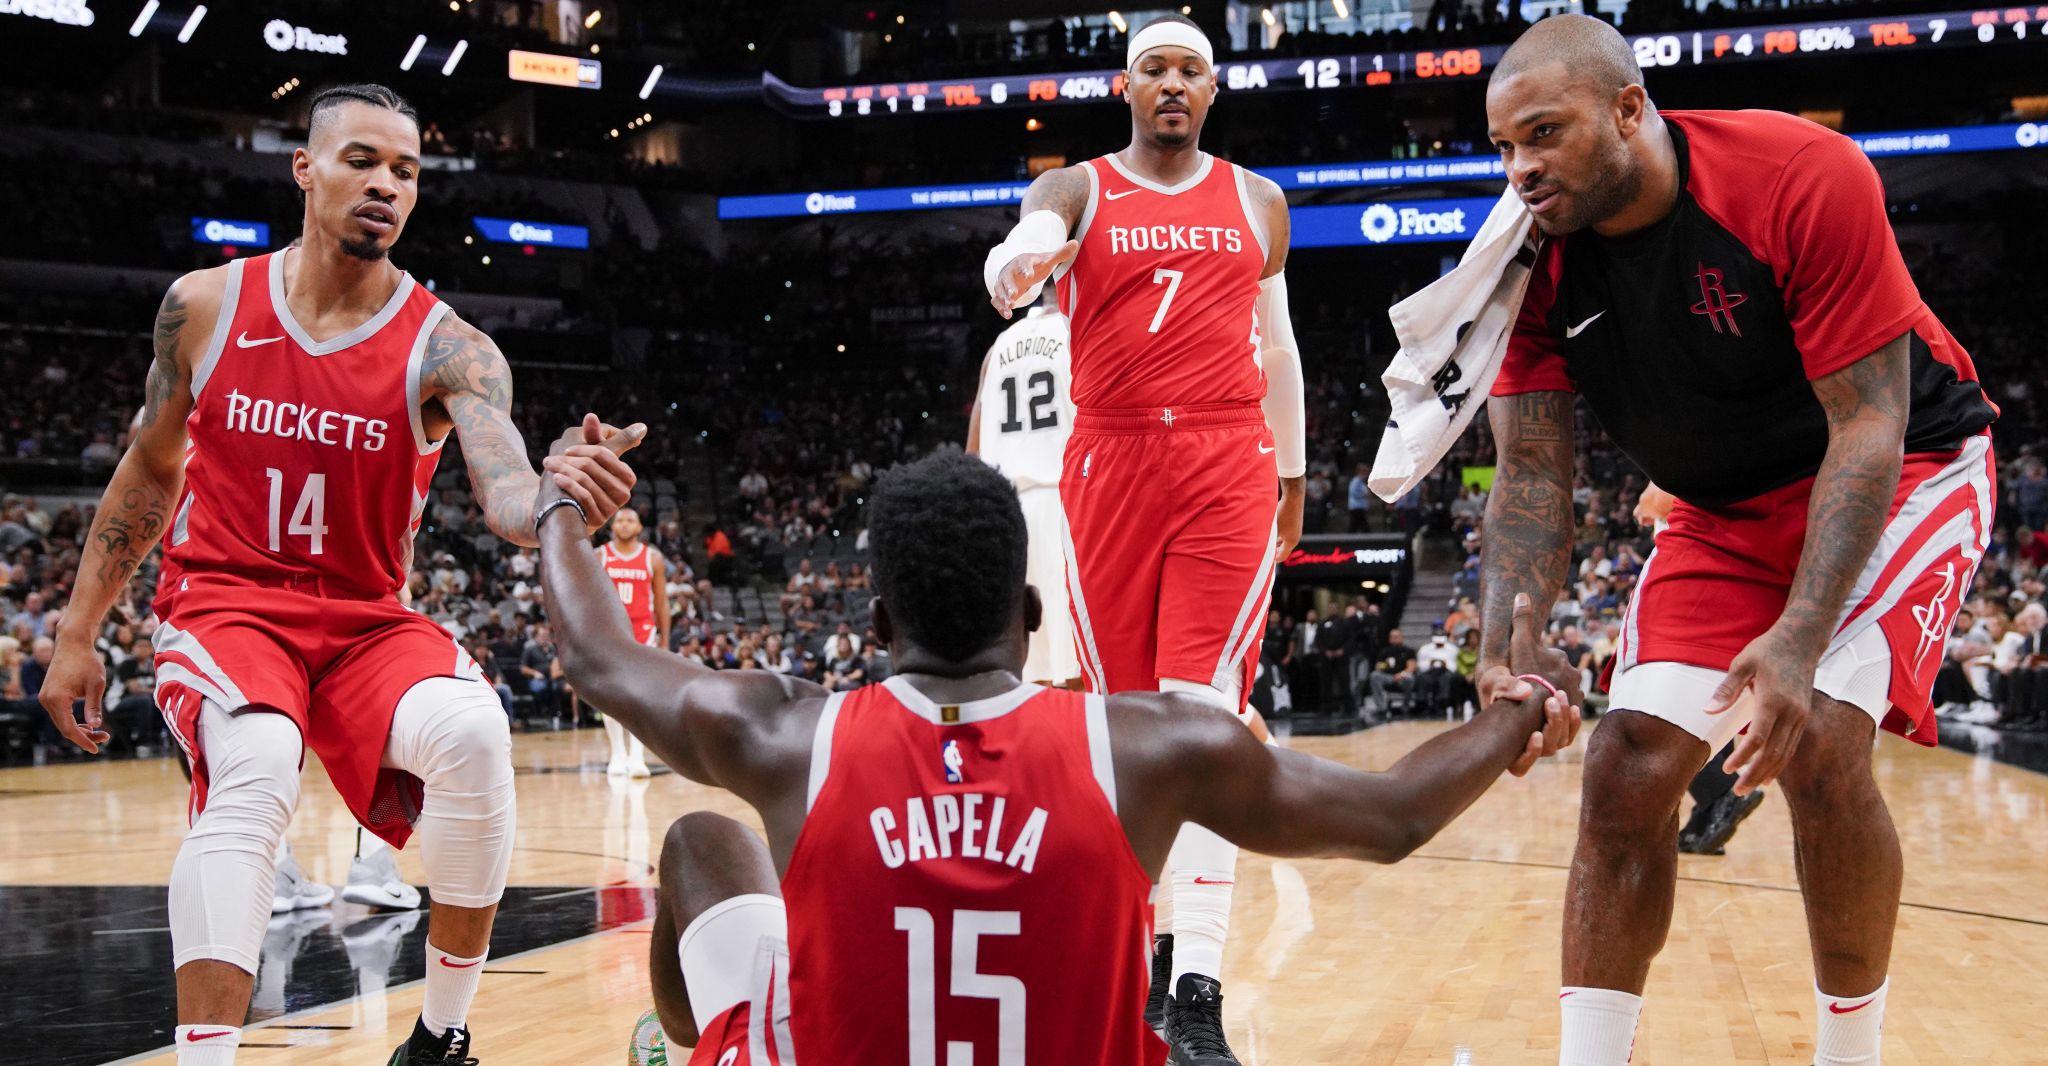 After initial worry, Rockets confident Clint Capela's hand injury isn't serious ...